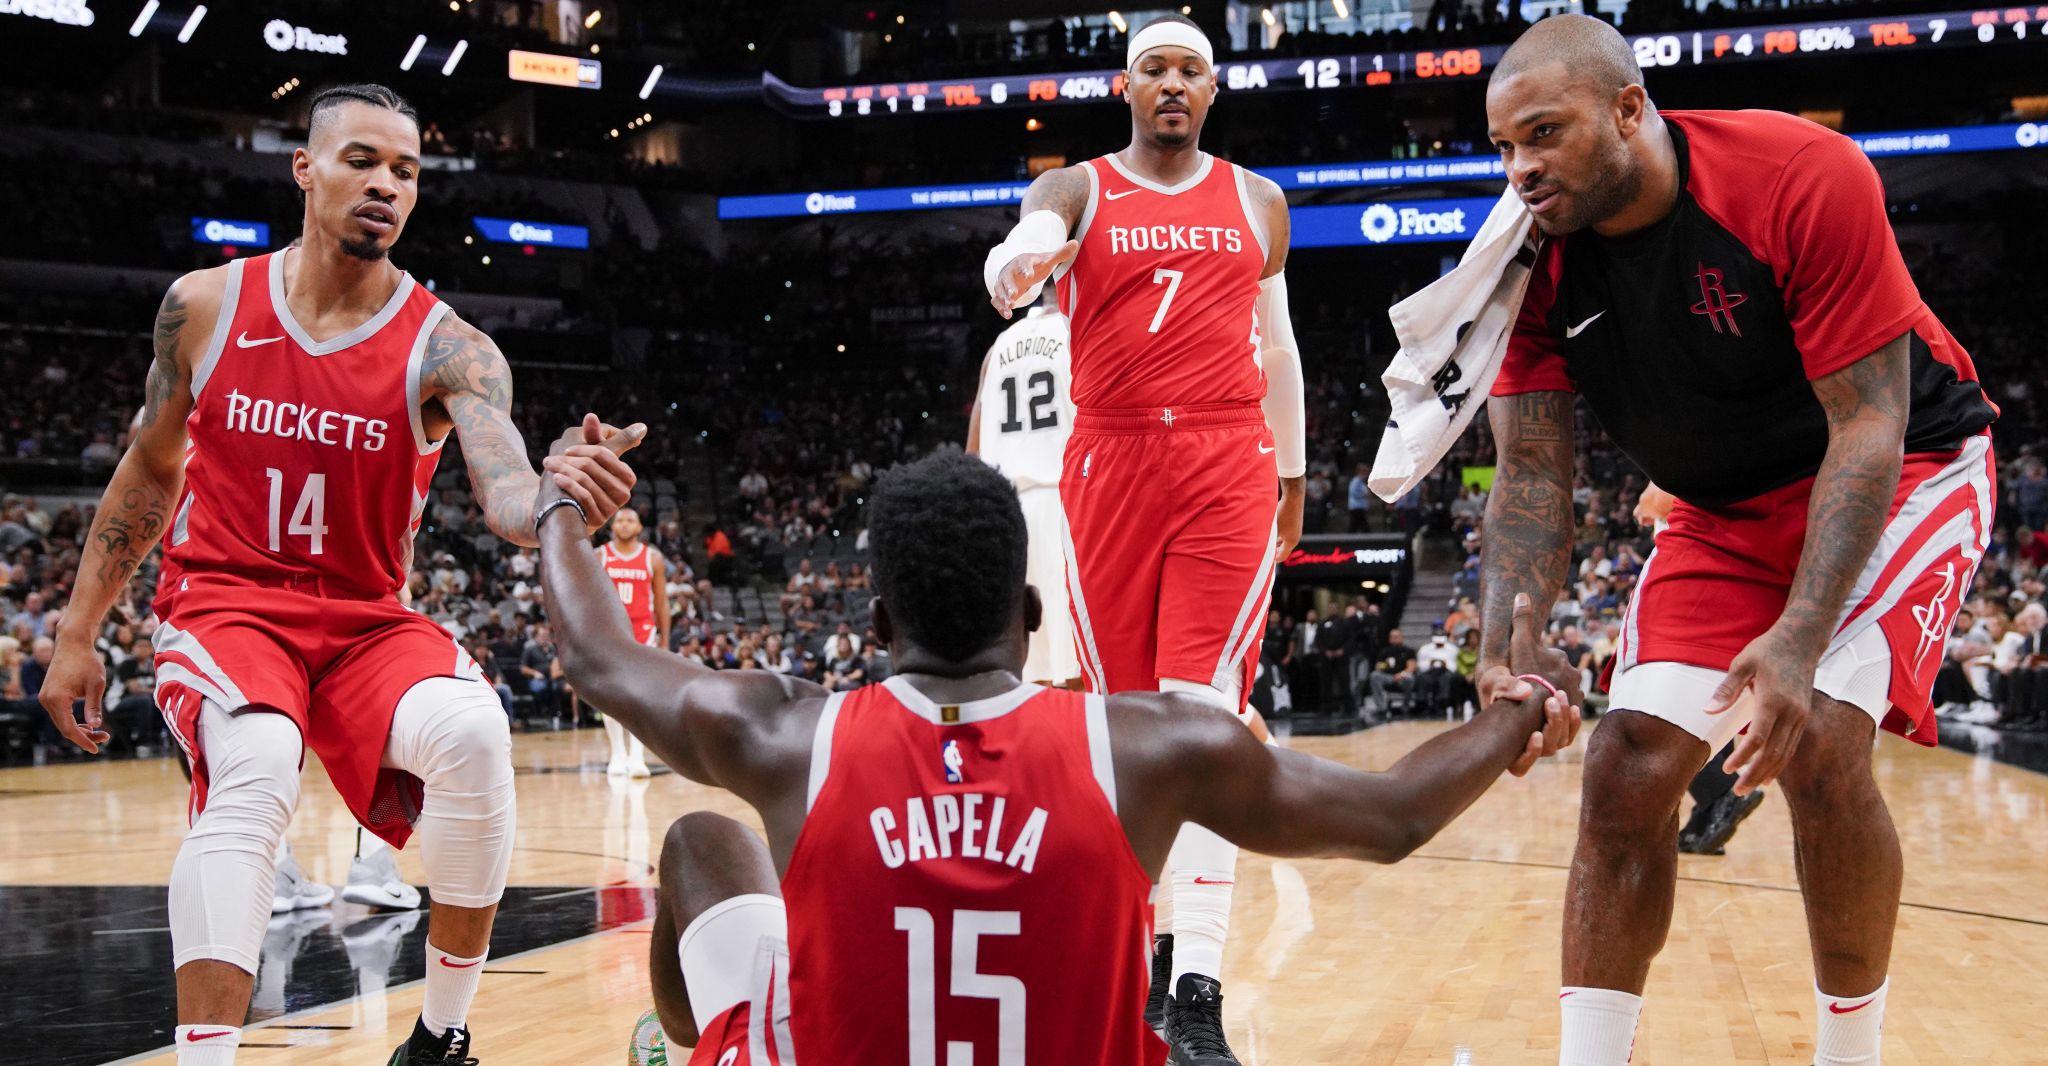 After initial worry, Rockets confident Clint Capela's hand injury isn't serious ...